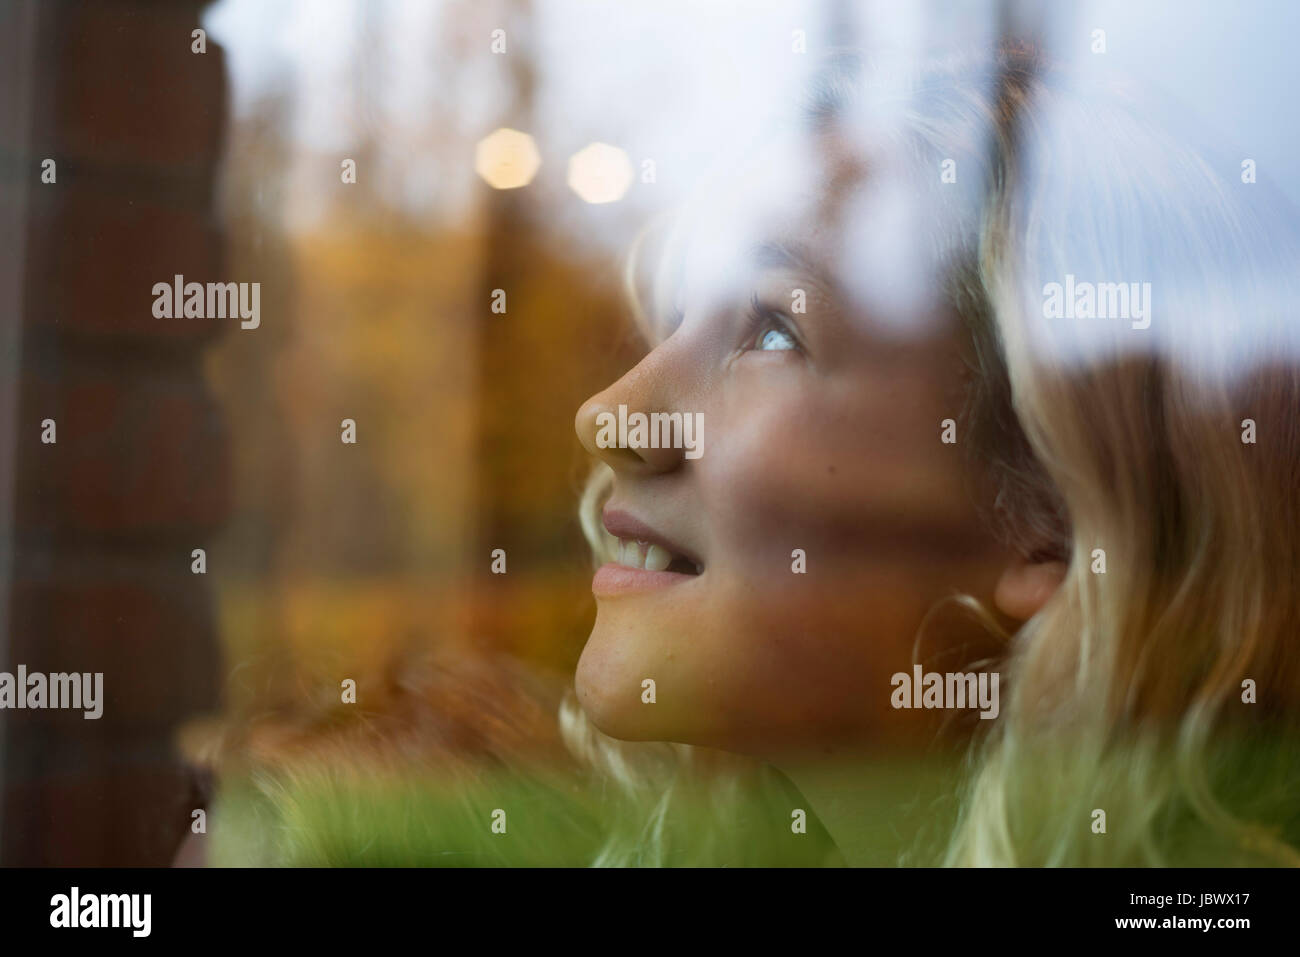 Girl with long blond hair looking up through window Stock Photo